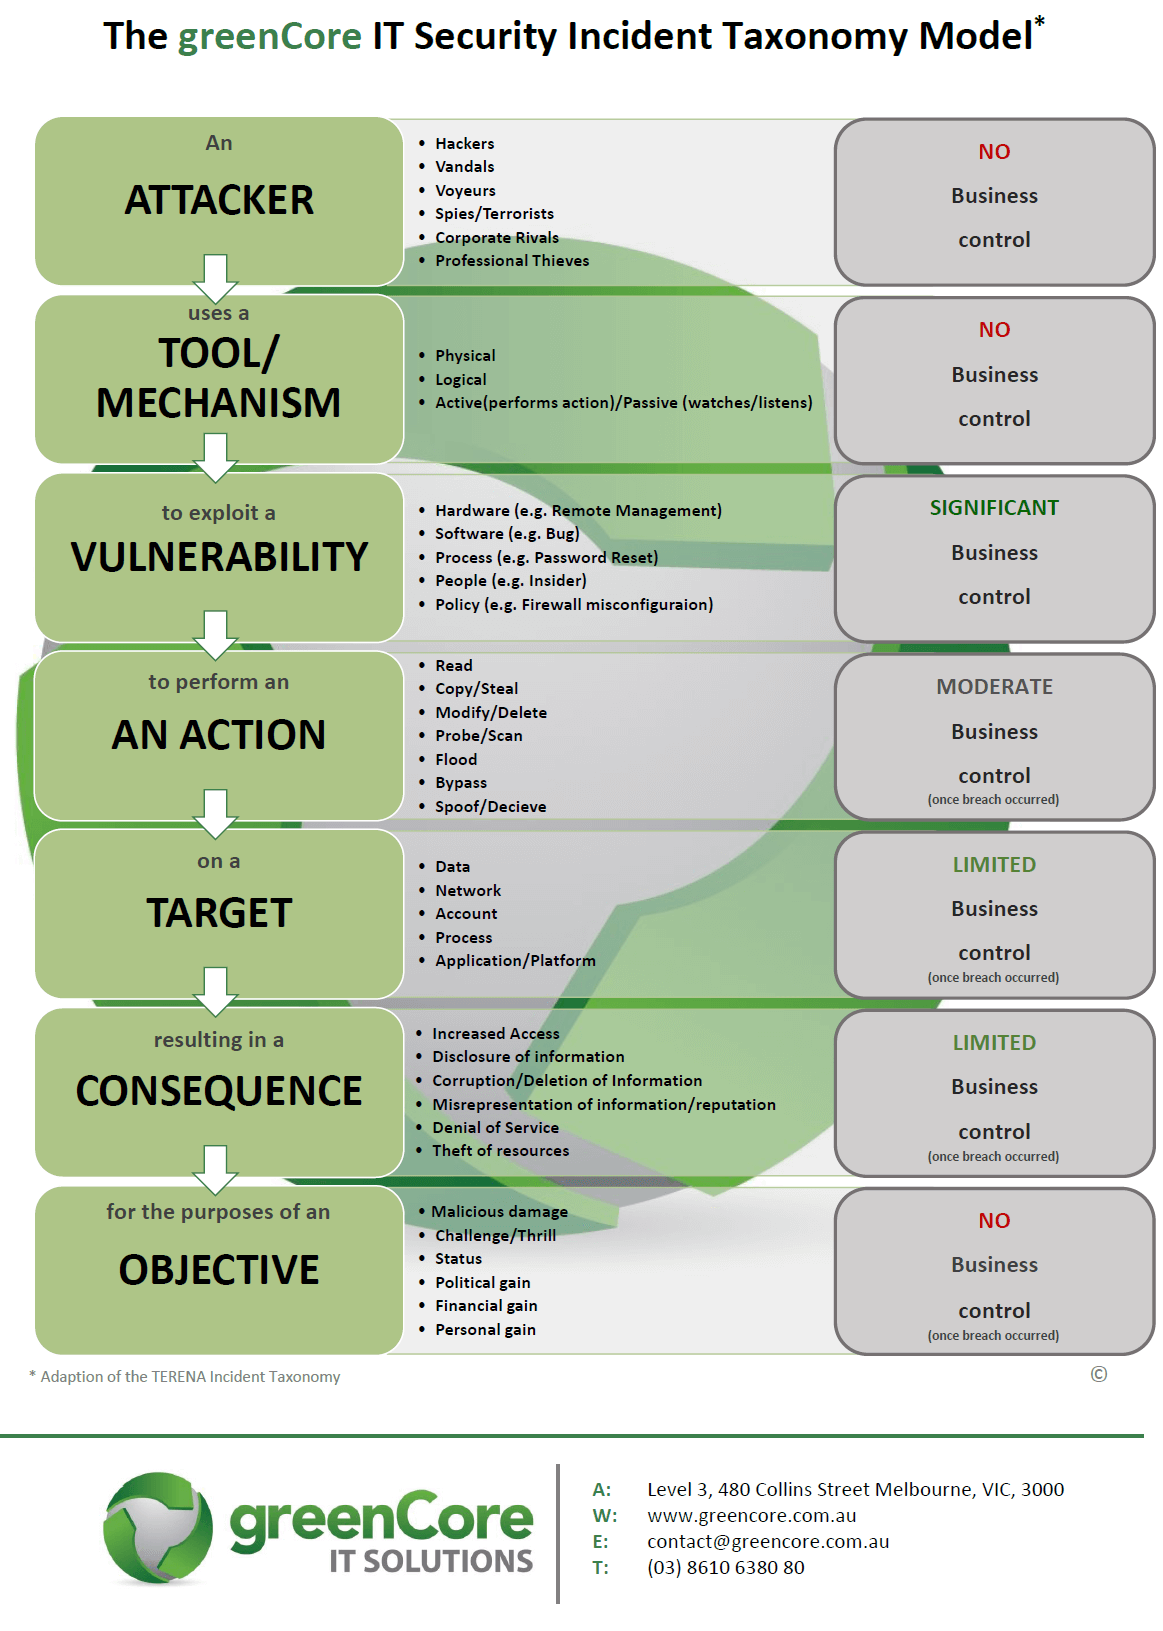 The greenCore IT Security Incident Taxonomy Model